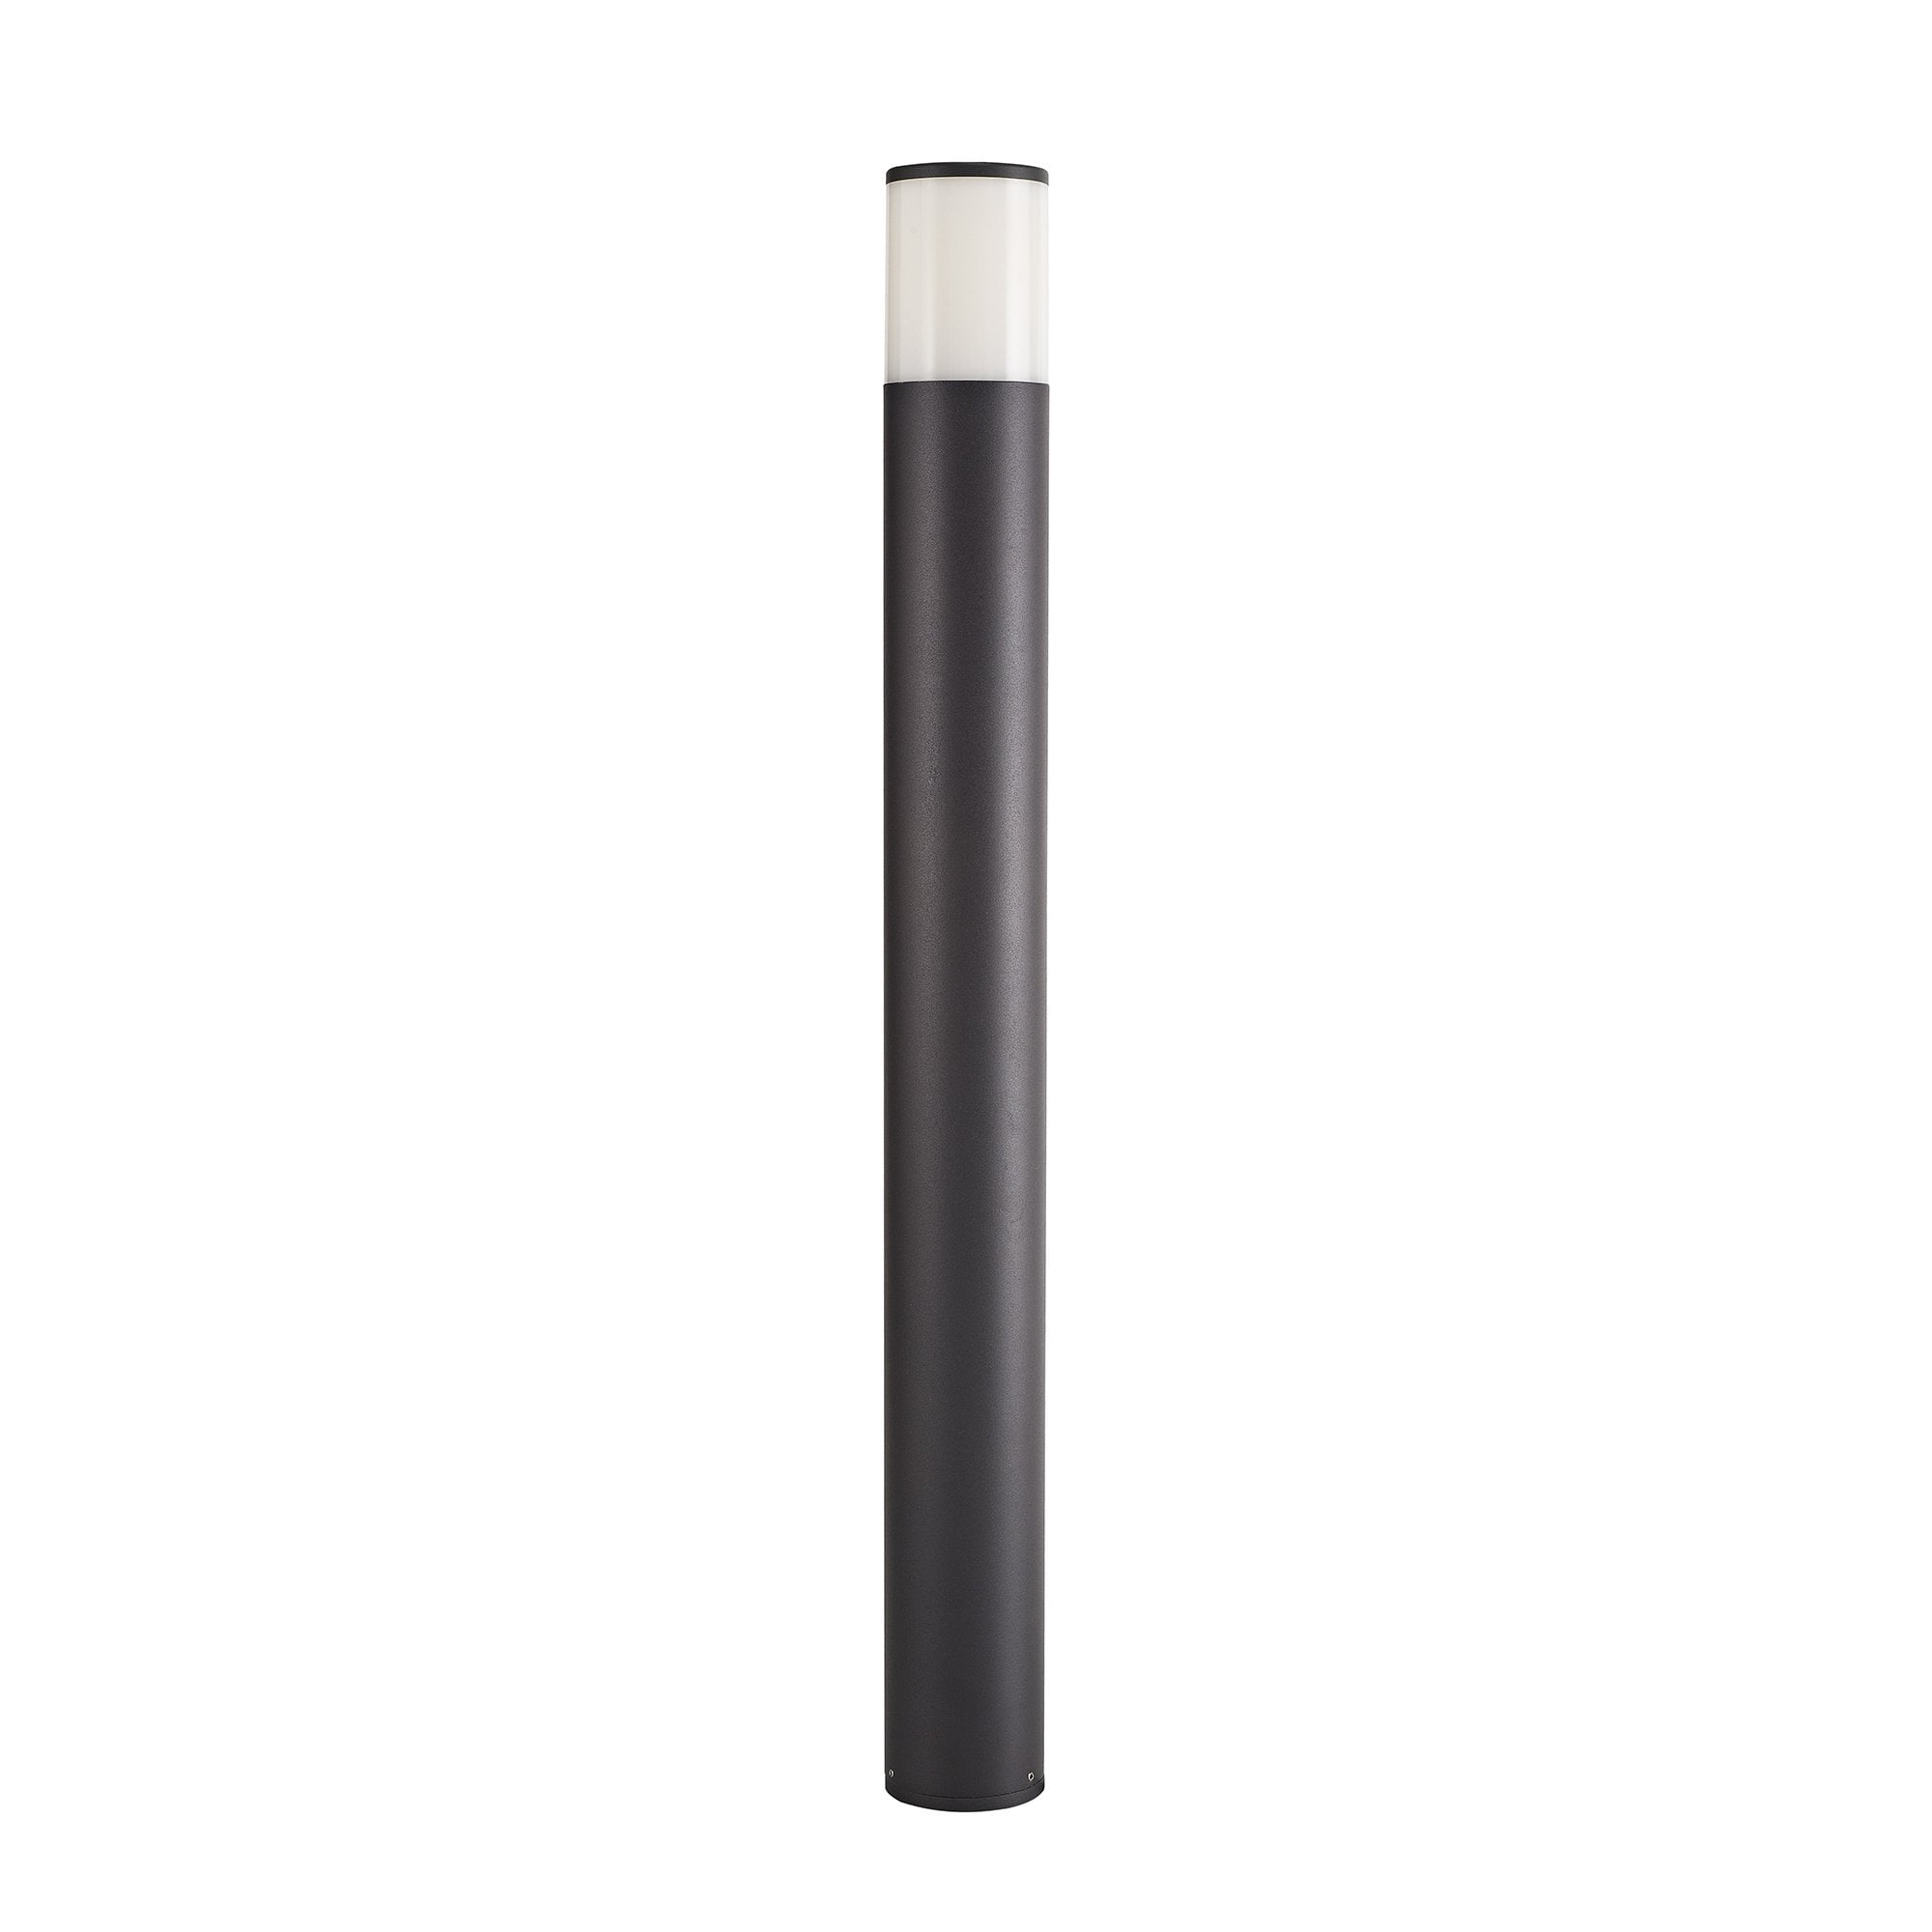 90cm Post Lamp 1 x E27, IP54, Anthracite/Opal, 2yrs Warranty